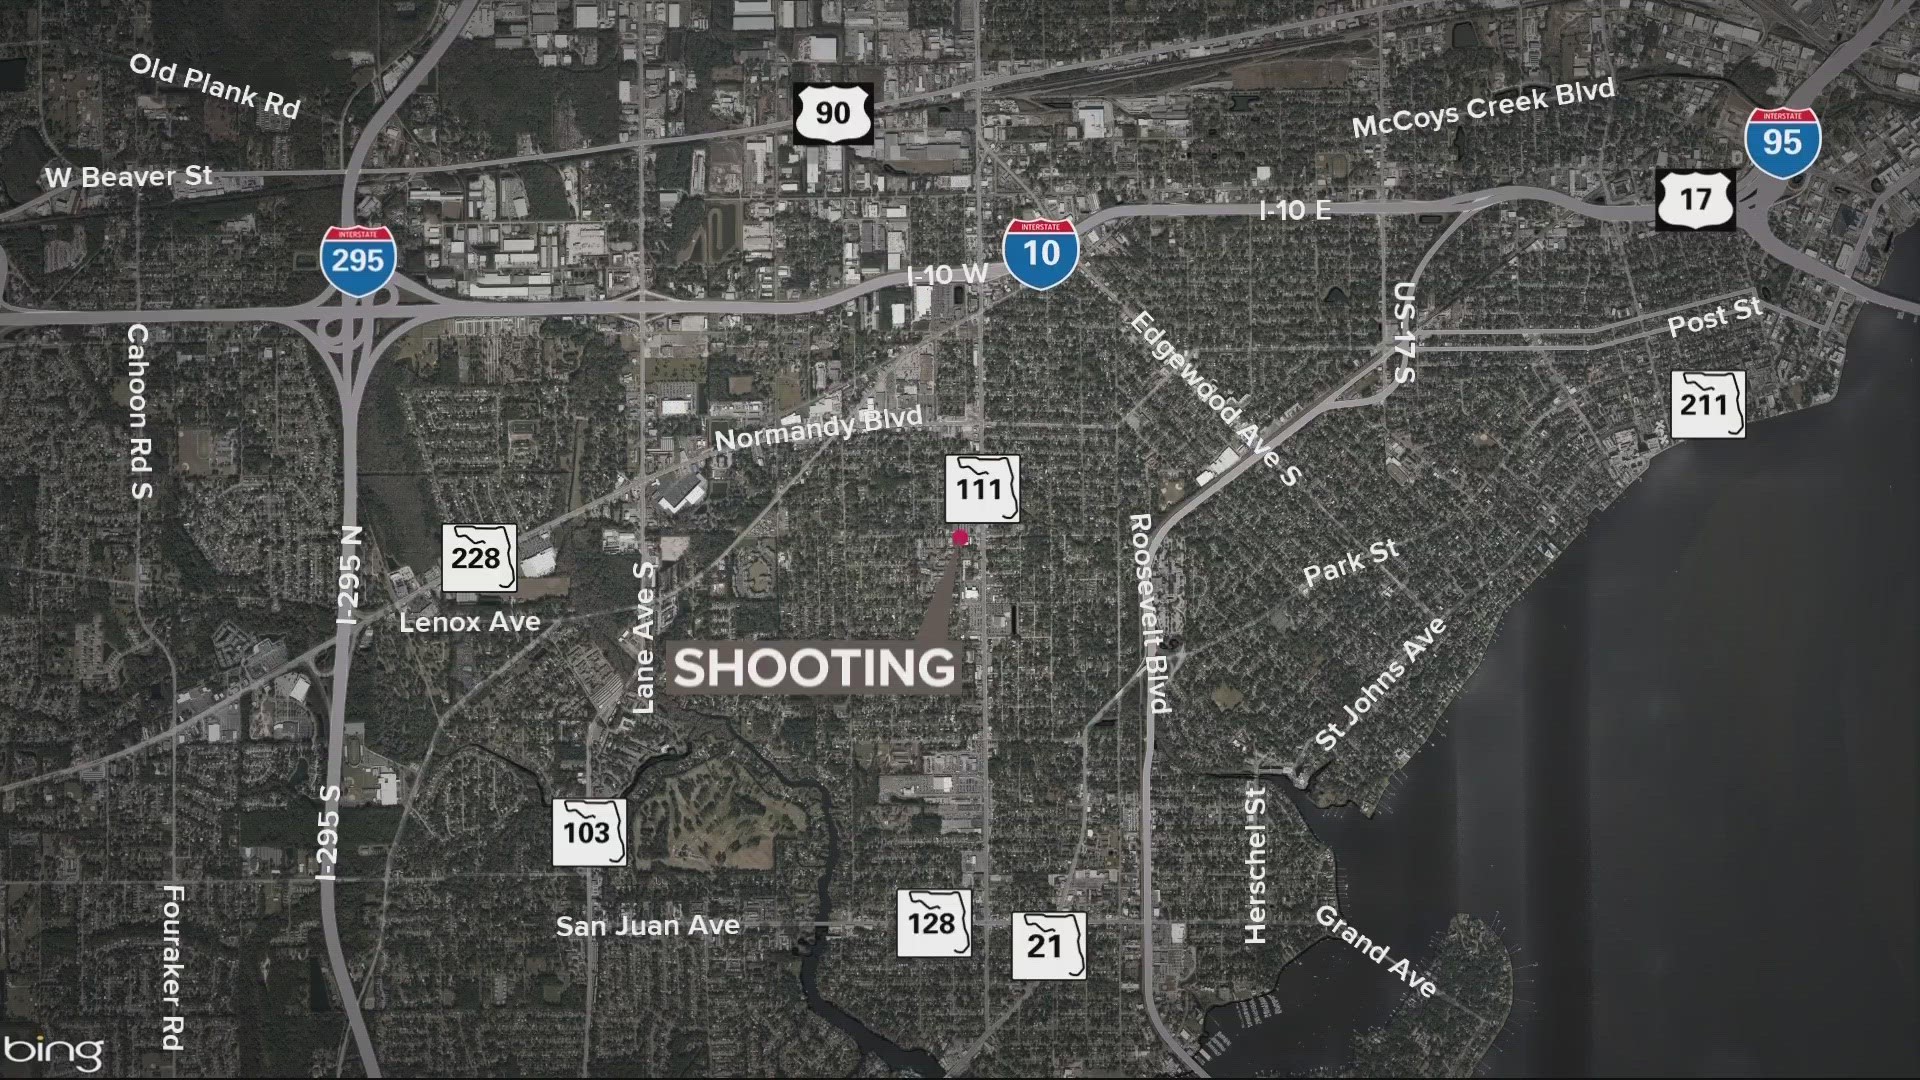 The Jacksonville Sheriff's Office responded to two shootings in different parts of the city.